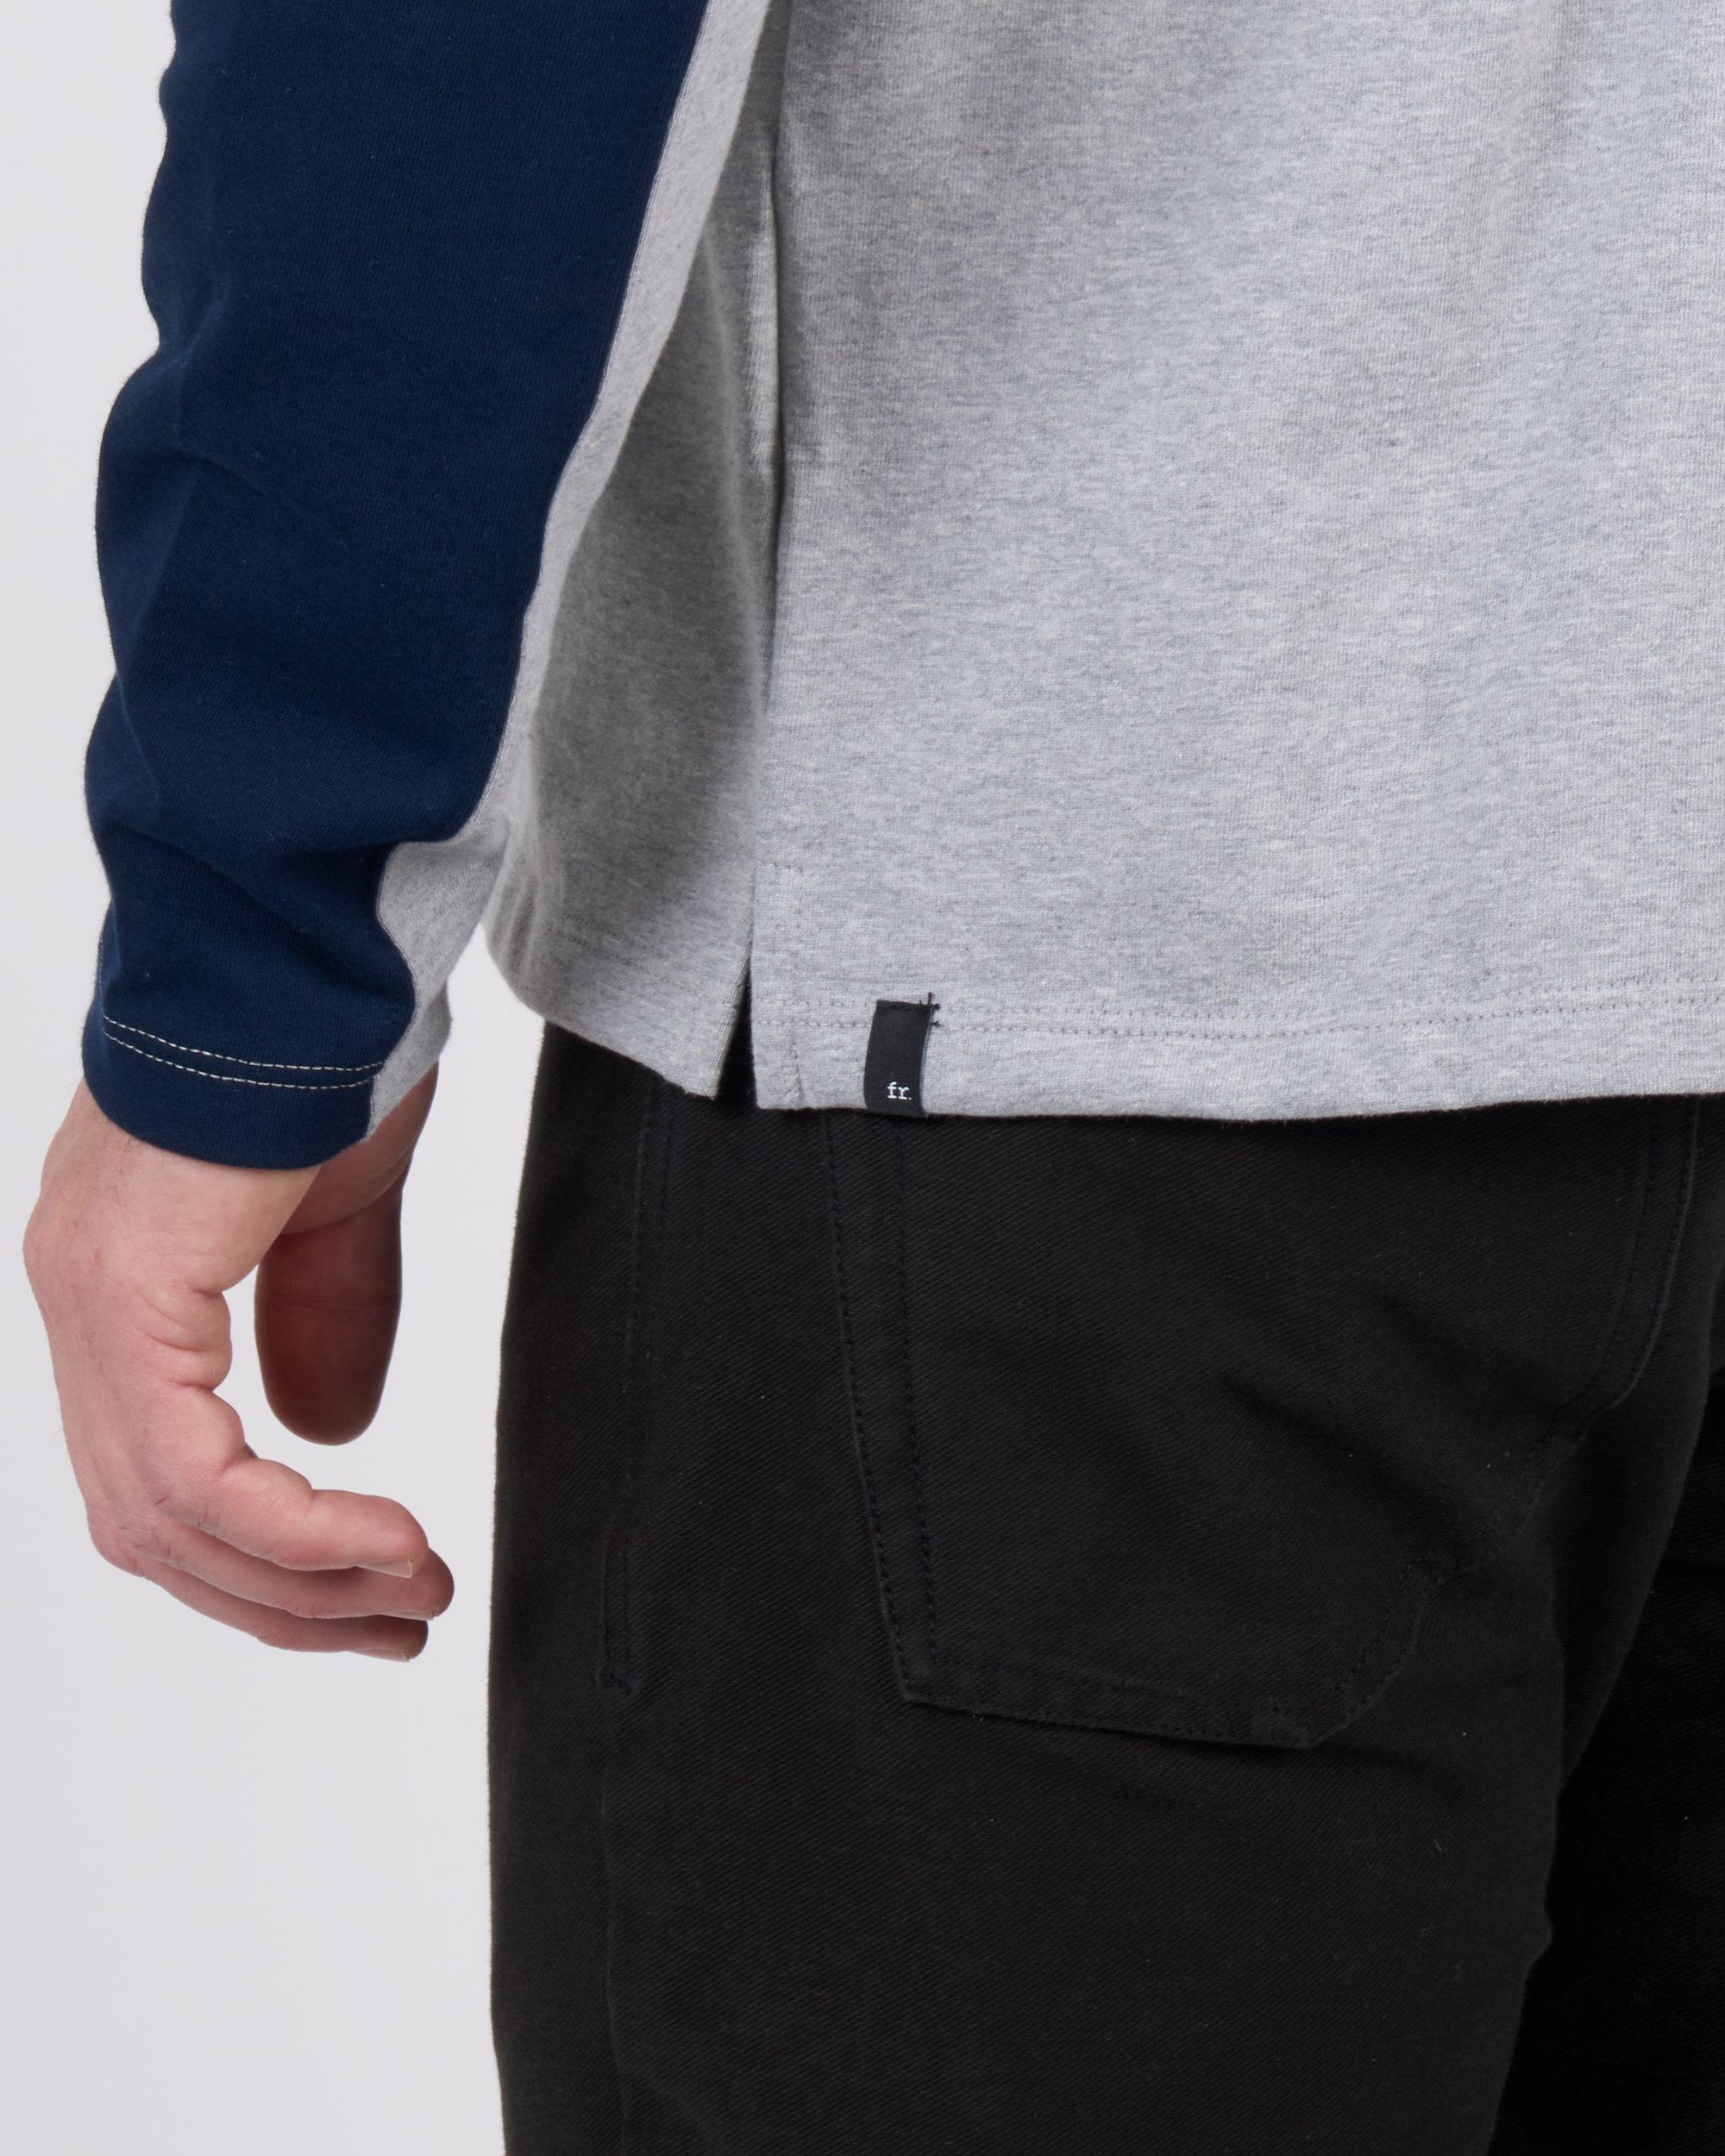 Foreign Rider Co Heavyweight Cotton Navy Grey Color-blocked Long Sleeve T-Shirt Bottom Side Split Seam & Cuff Detail